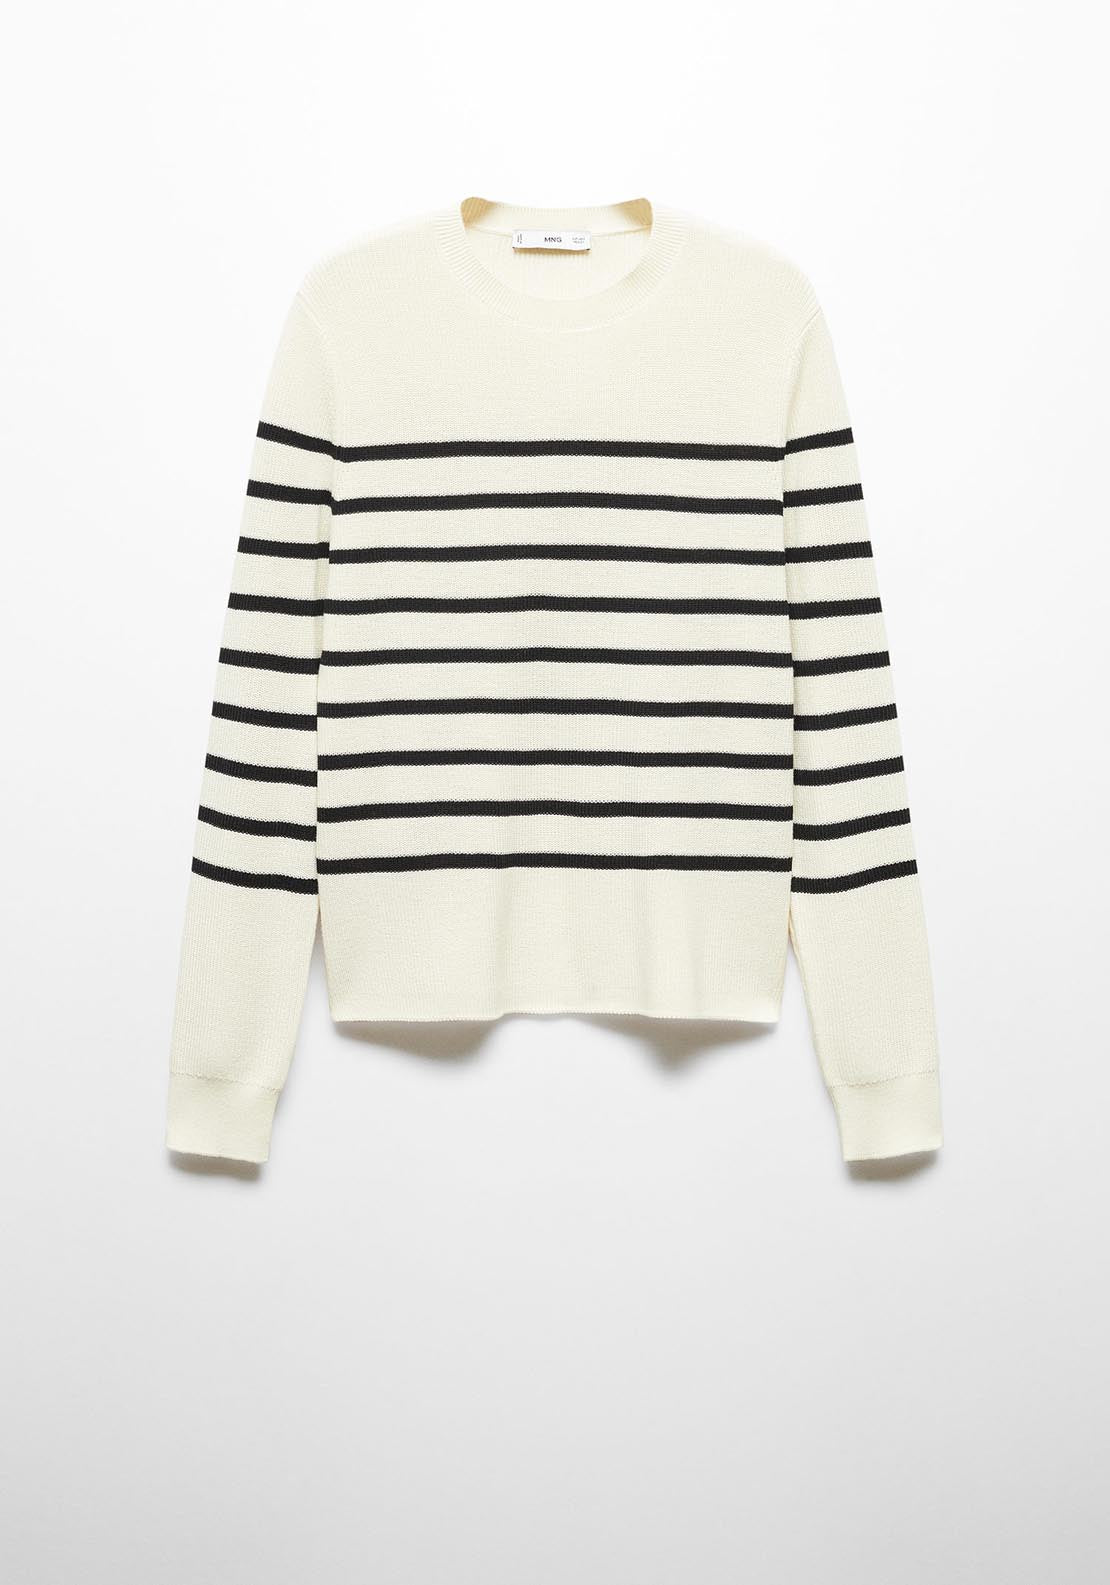 Mango Roundneck knitted sweater 8 Shaws Department Stores